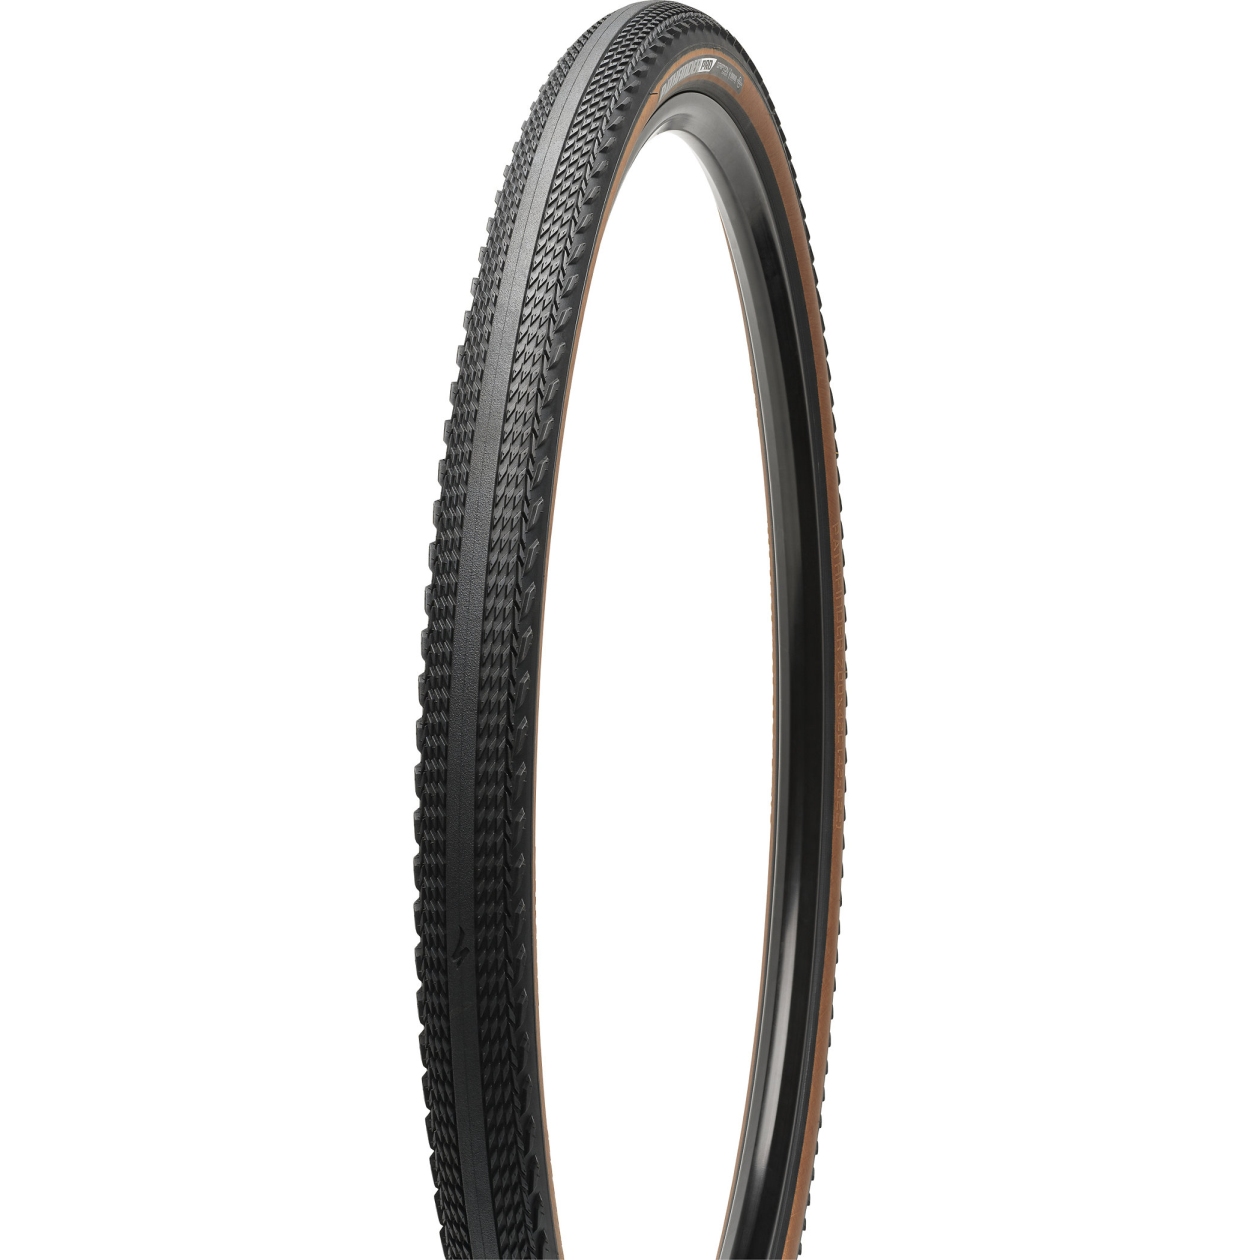 Picture of Specialized Pathfinder Pro 2Bliss Ready Gravel Folding Tire 42-622 - Tan Sidewalls